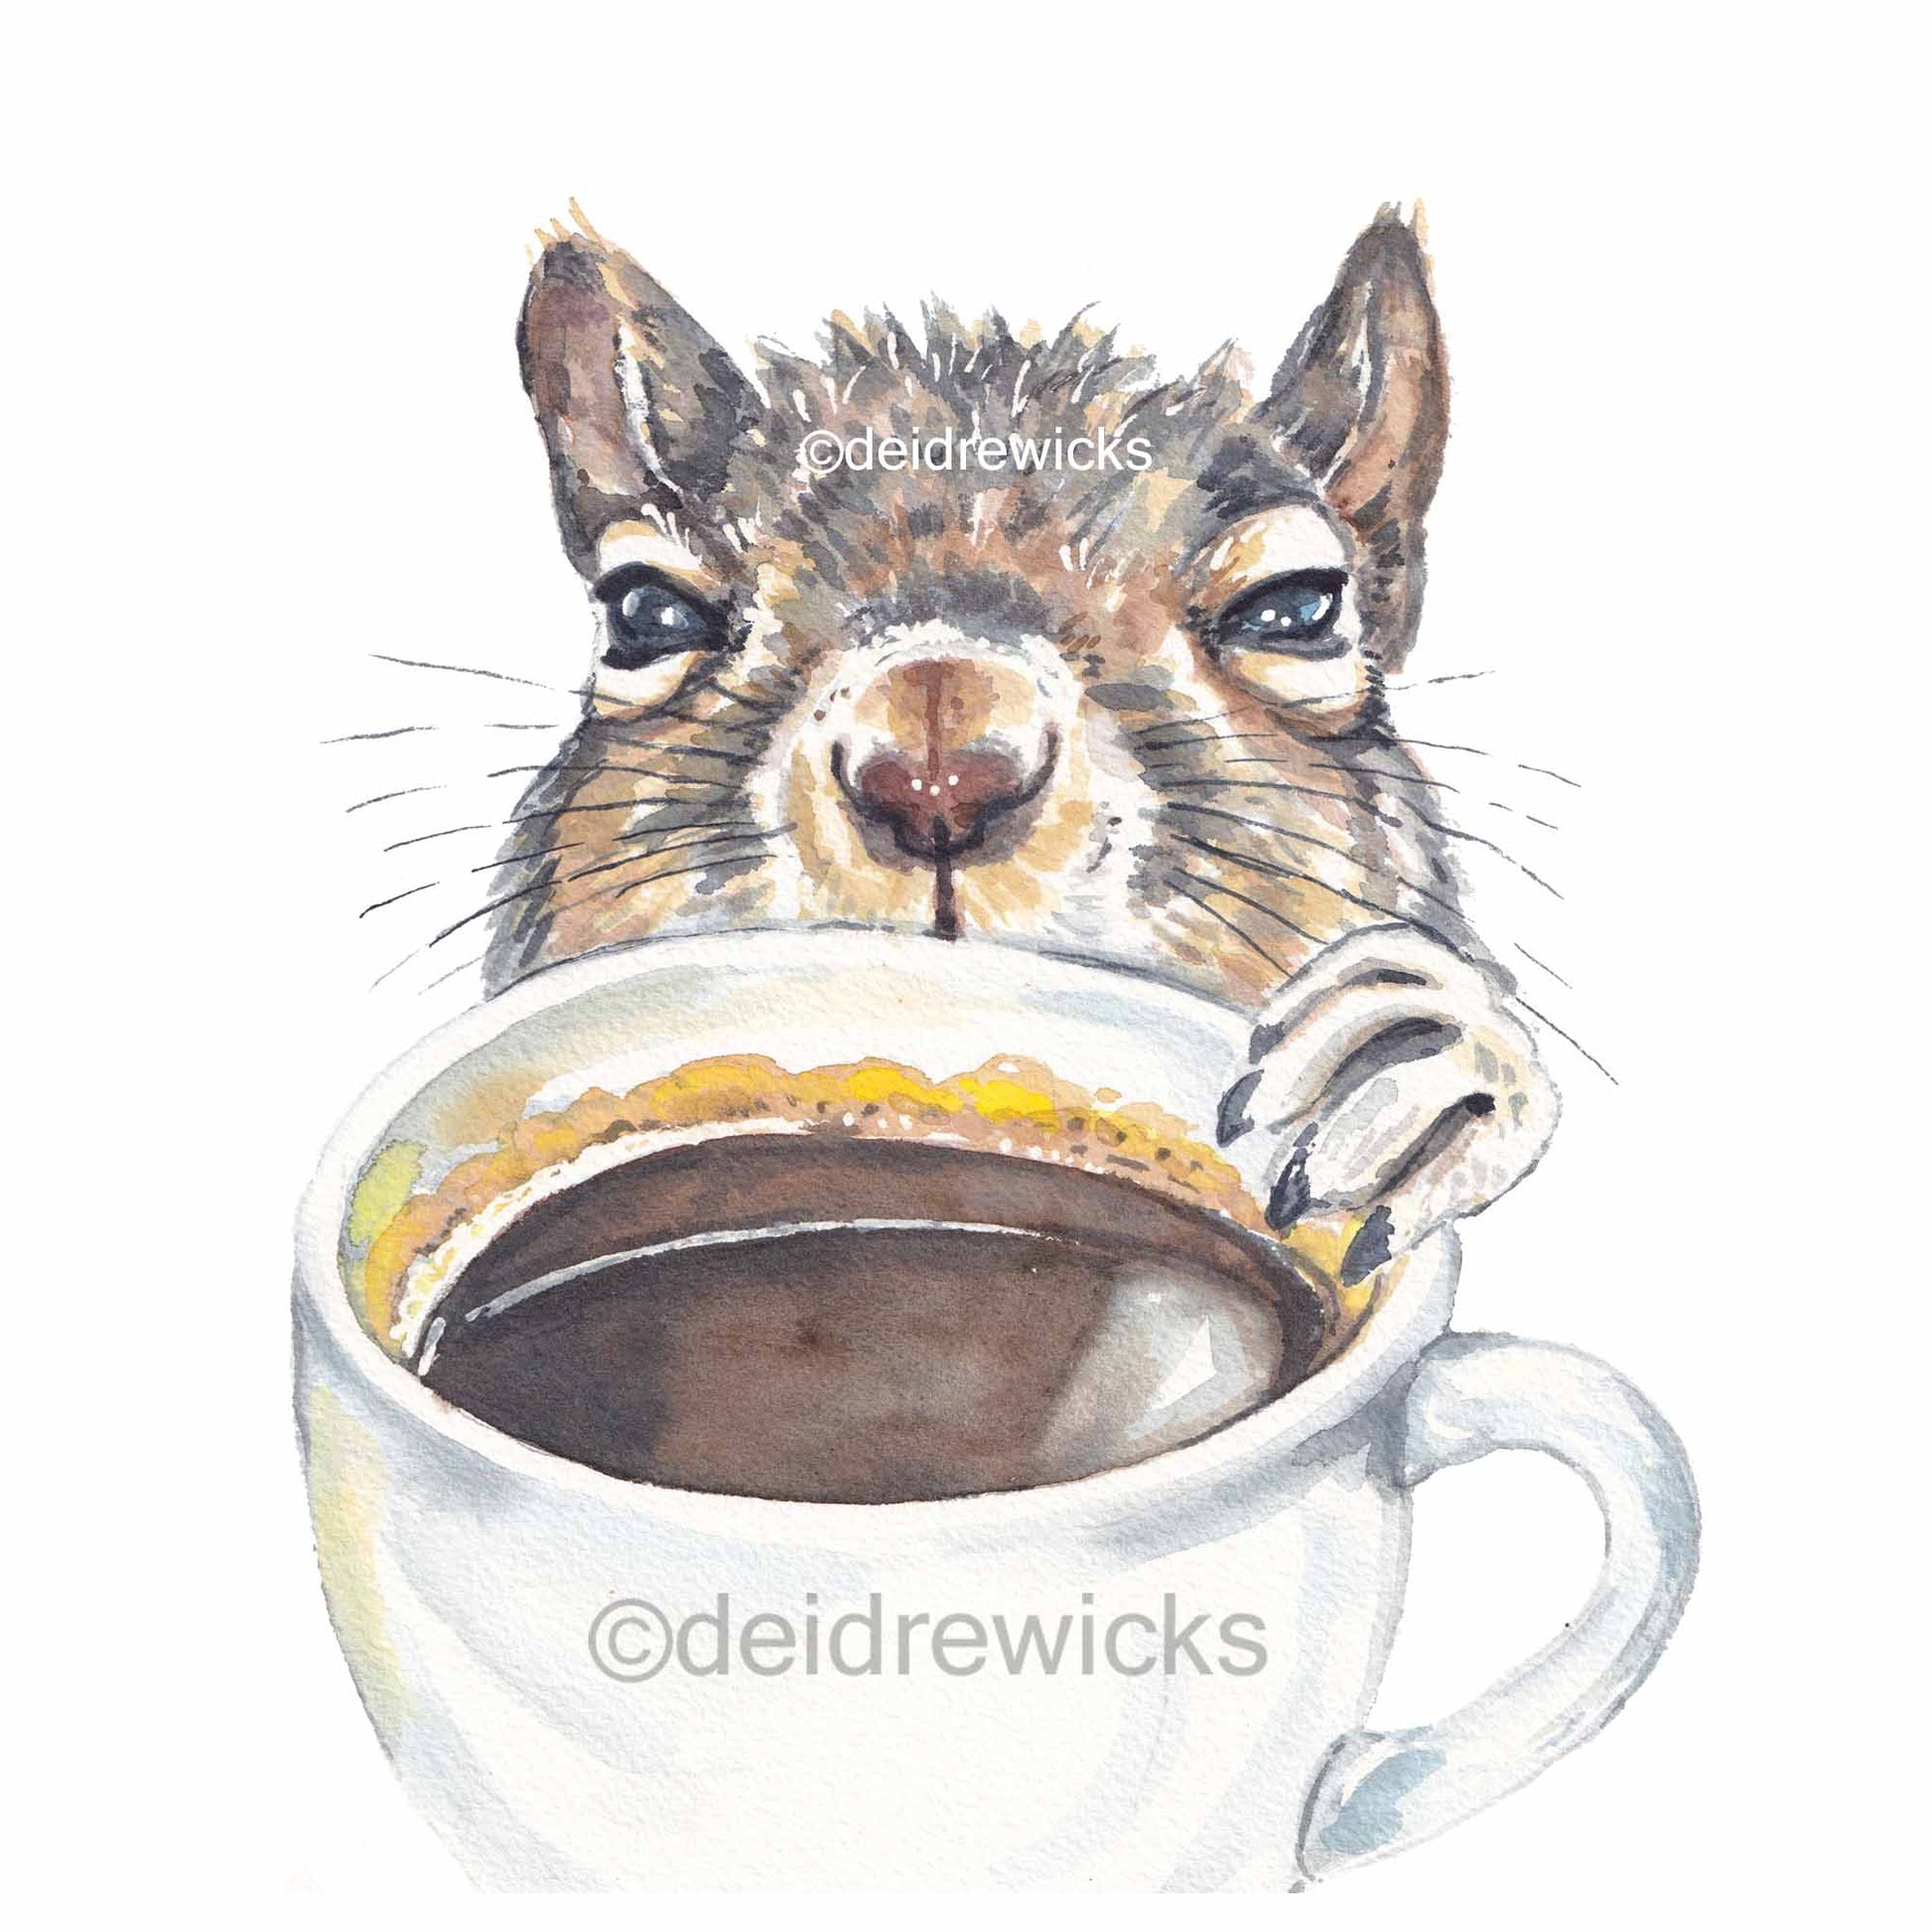 Watercolour painting of a bleary-eyed squirrel reaching for a cup of coffee. Original animal art by Deidre Wicks